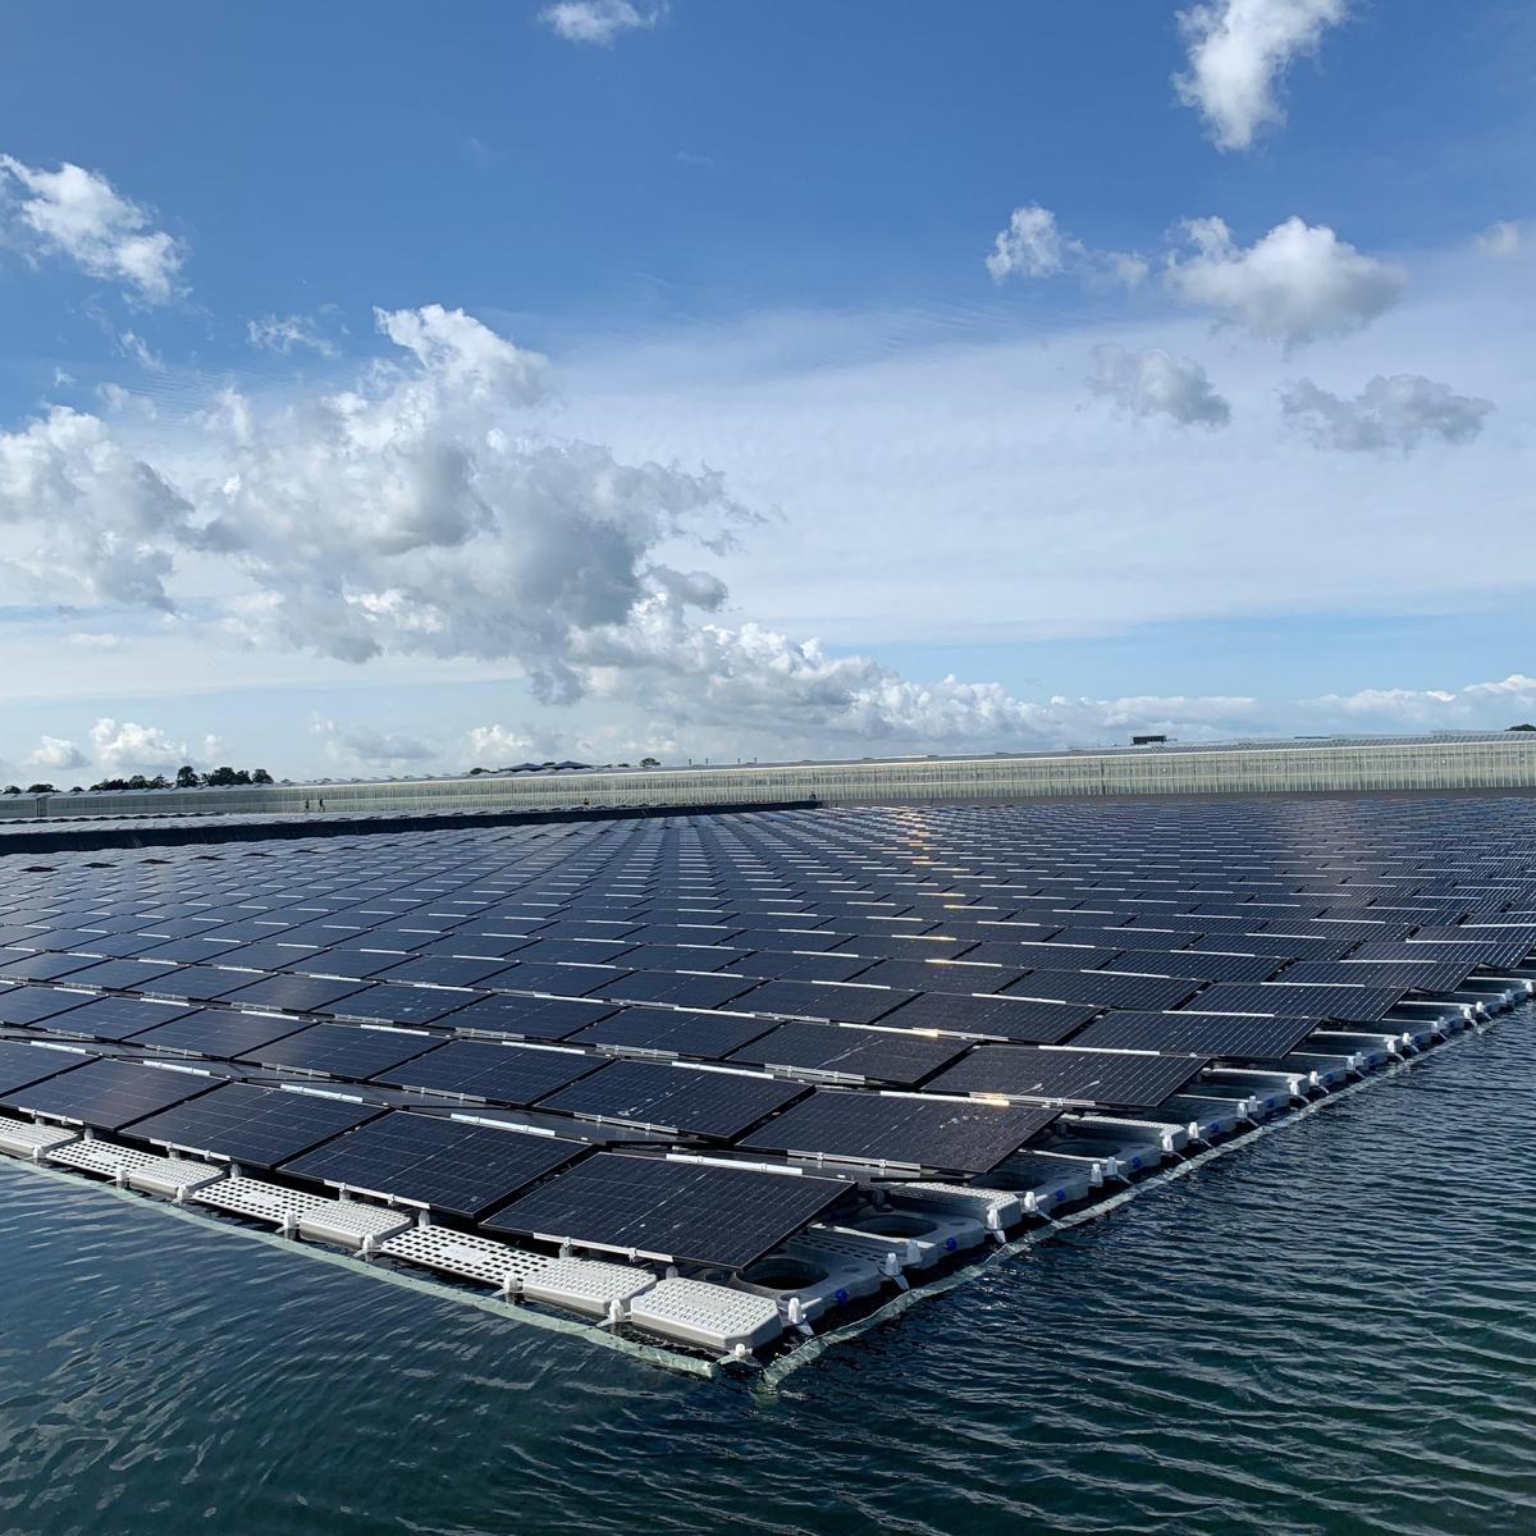 Sun-on-water solar panels installed in a water reservoir